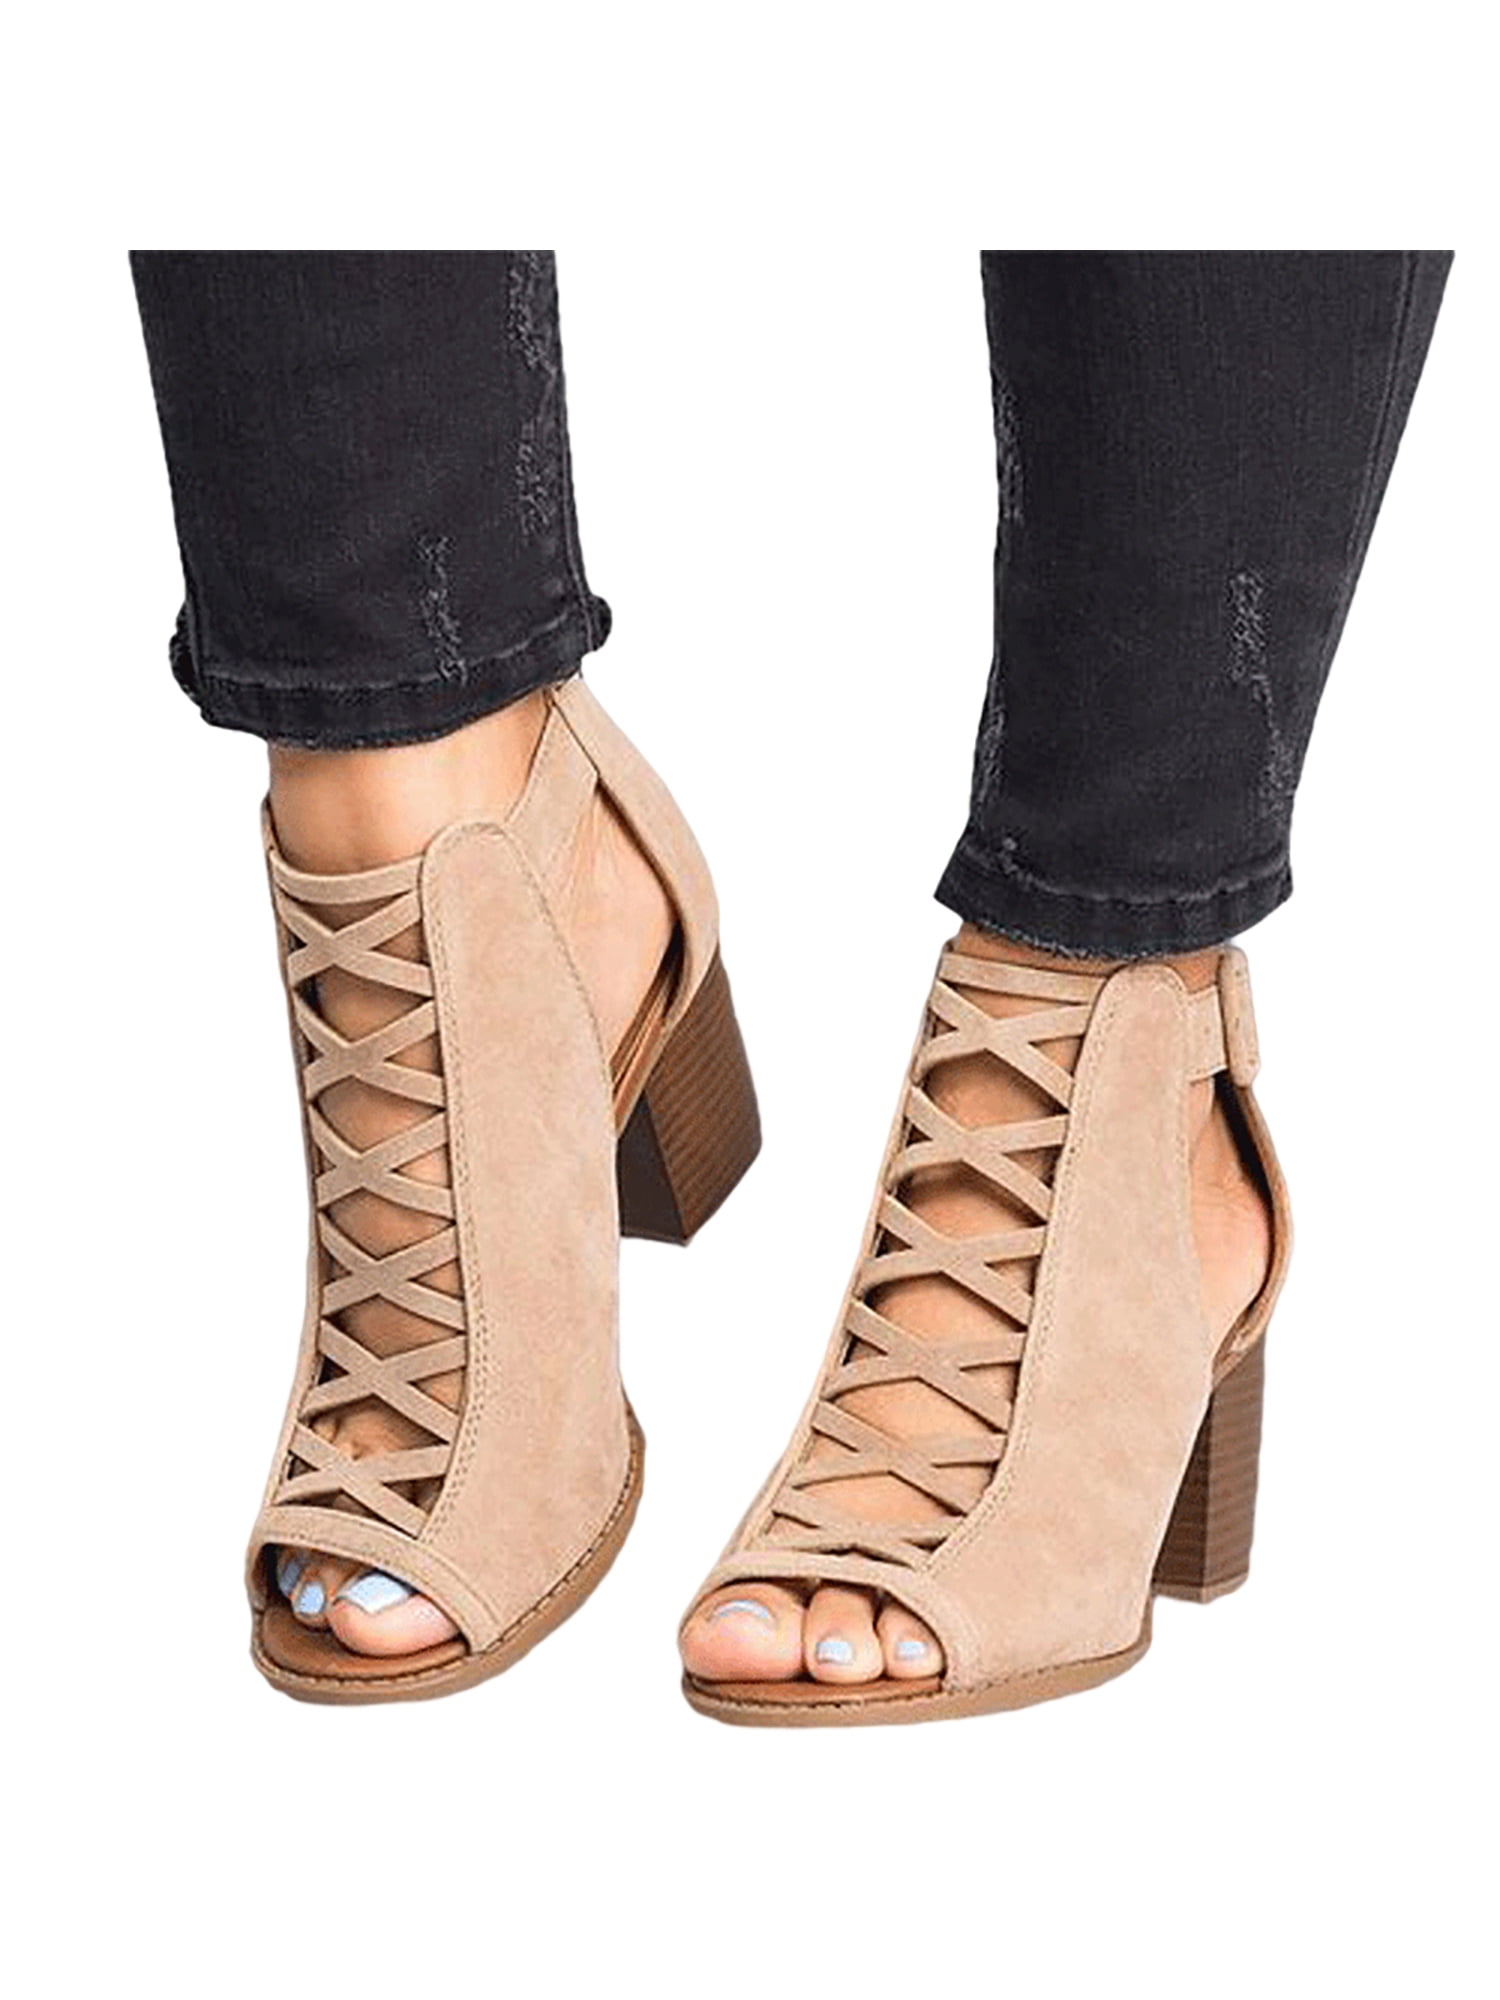 Fashion Women Ankle Strap Peep Toe Sandals Mid Heel Chunky Platform Casual Shoes 